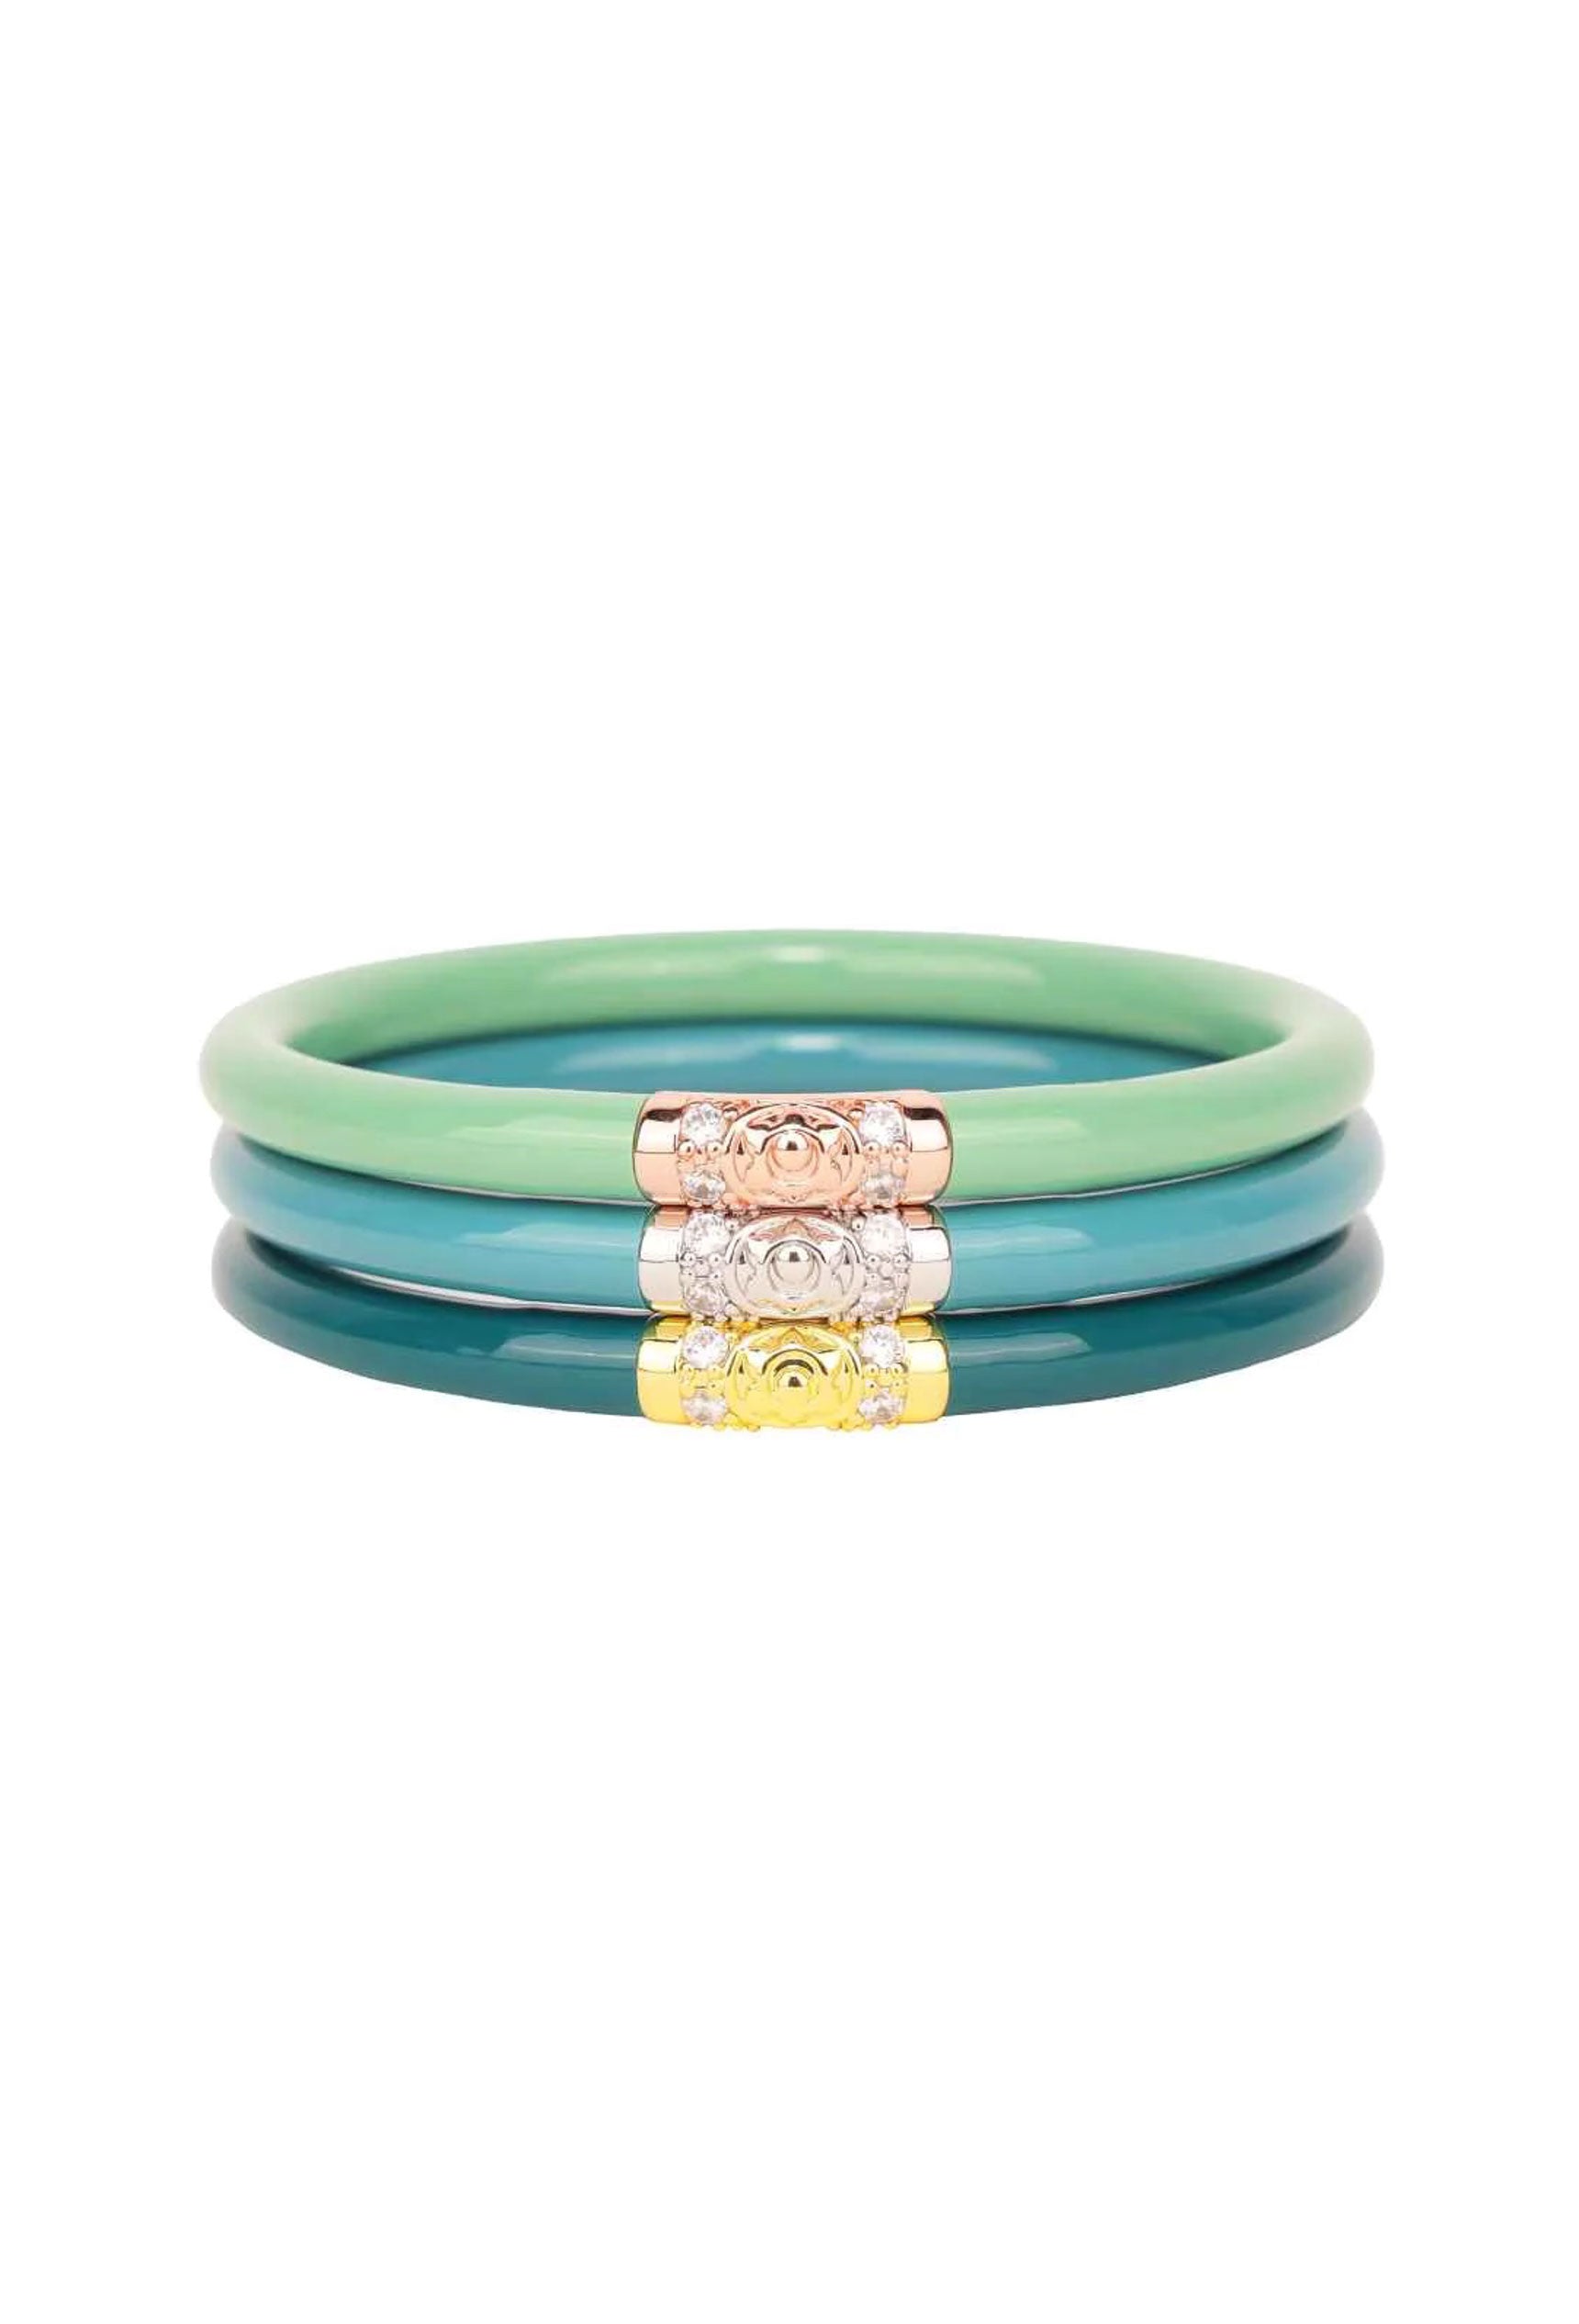 Set of 3 Rose Gold All Weather Bangles by BuDhaGirl - NEWTWIST